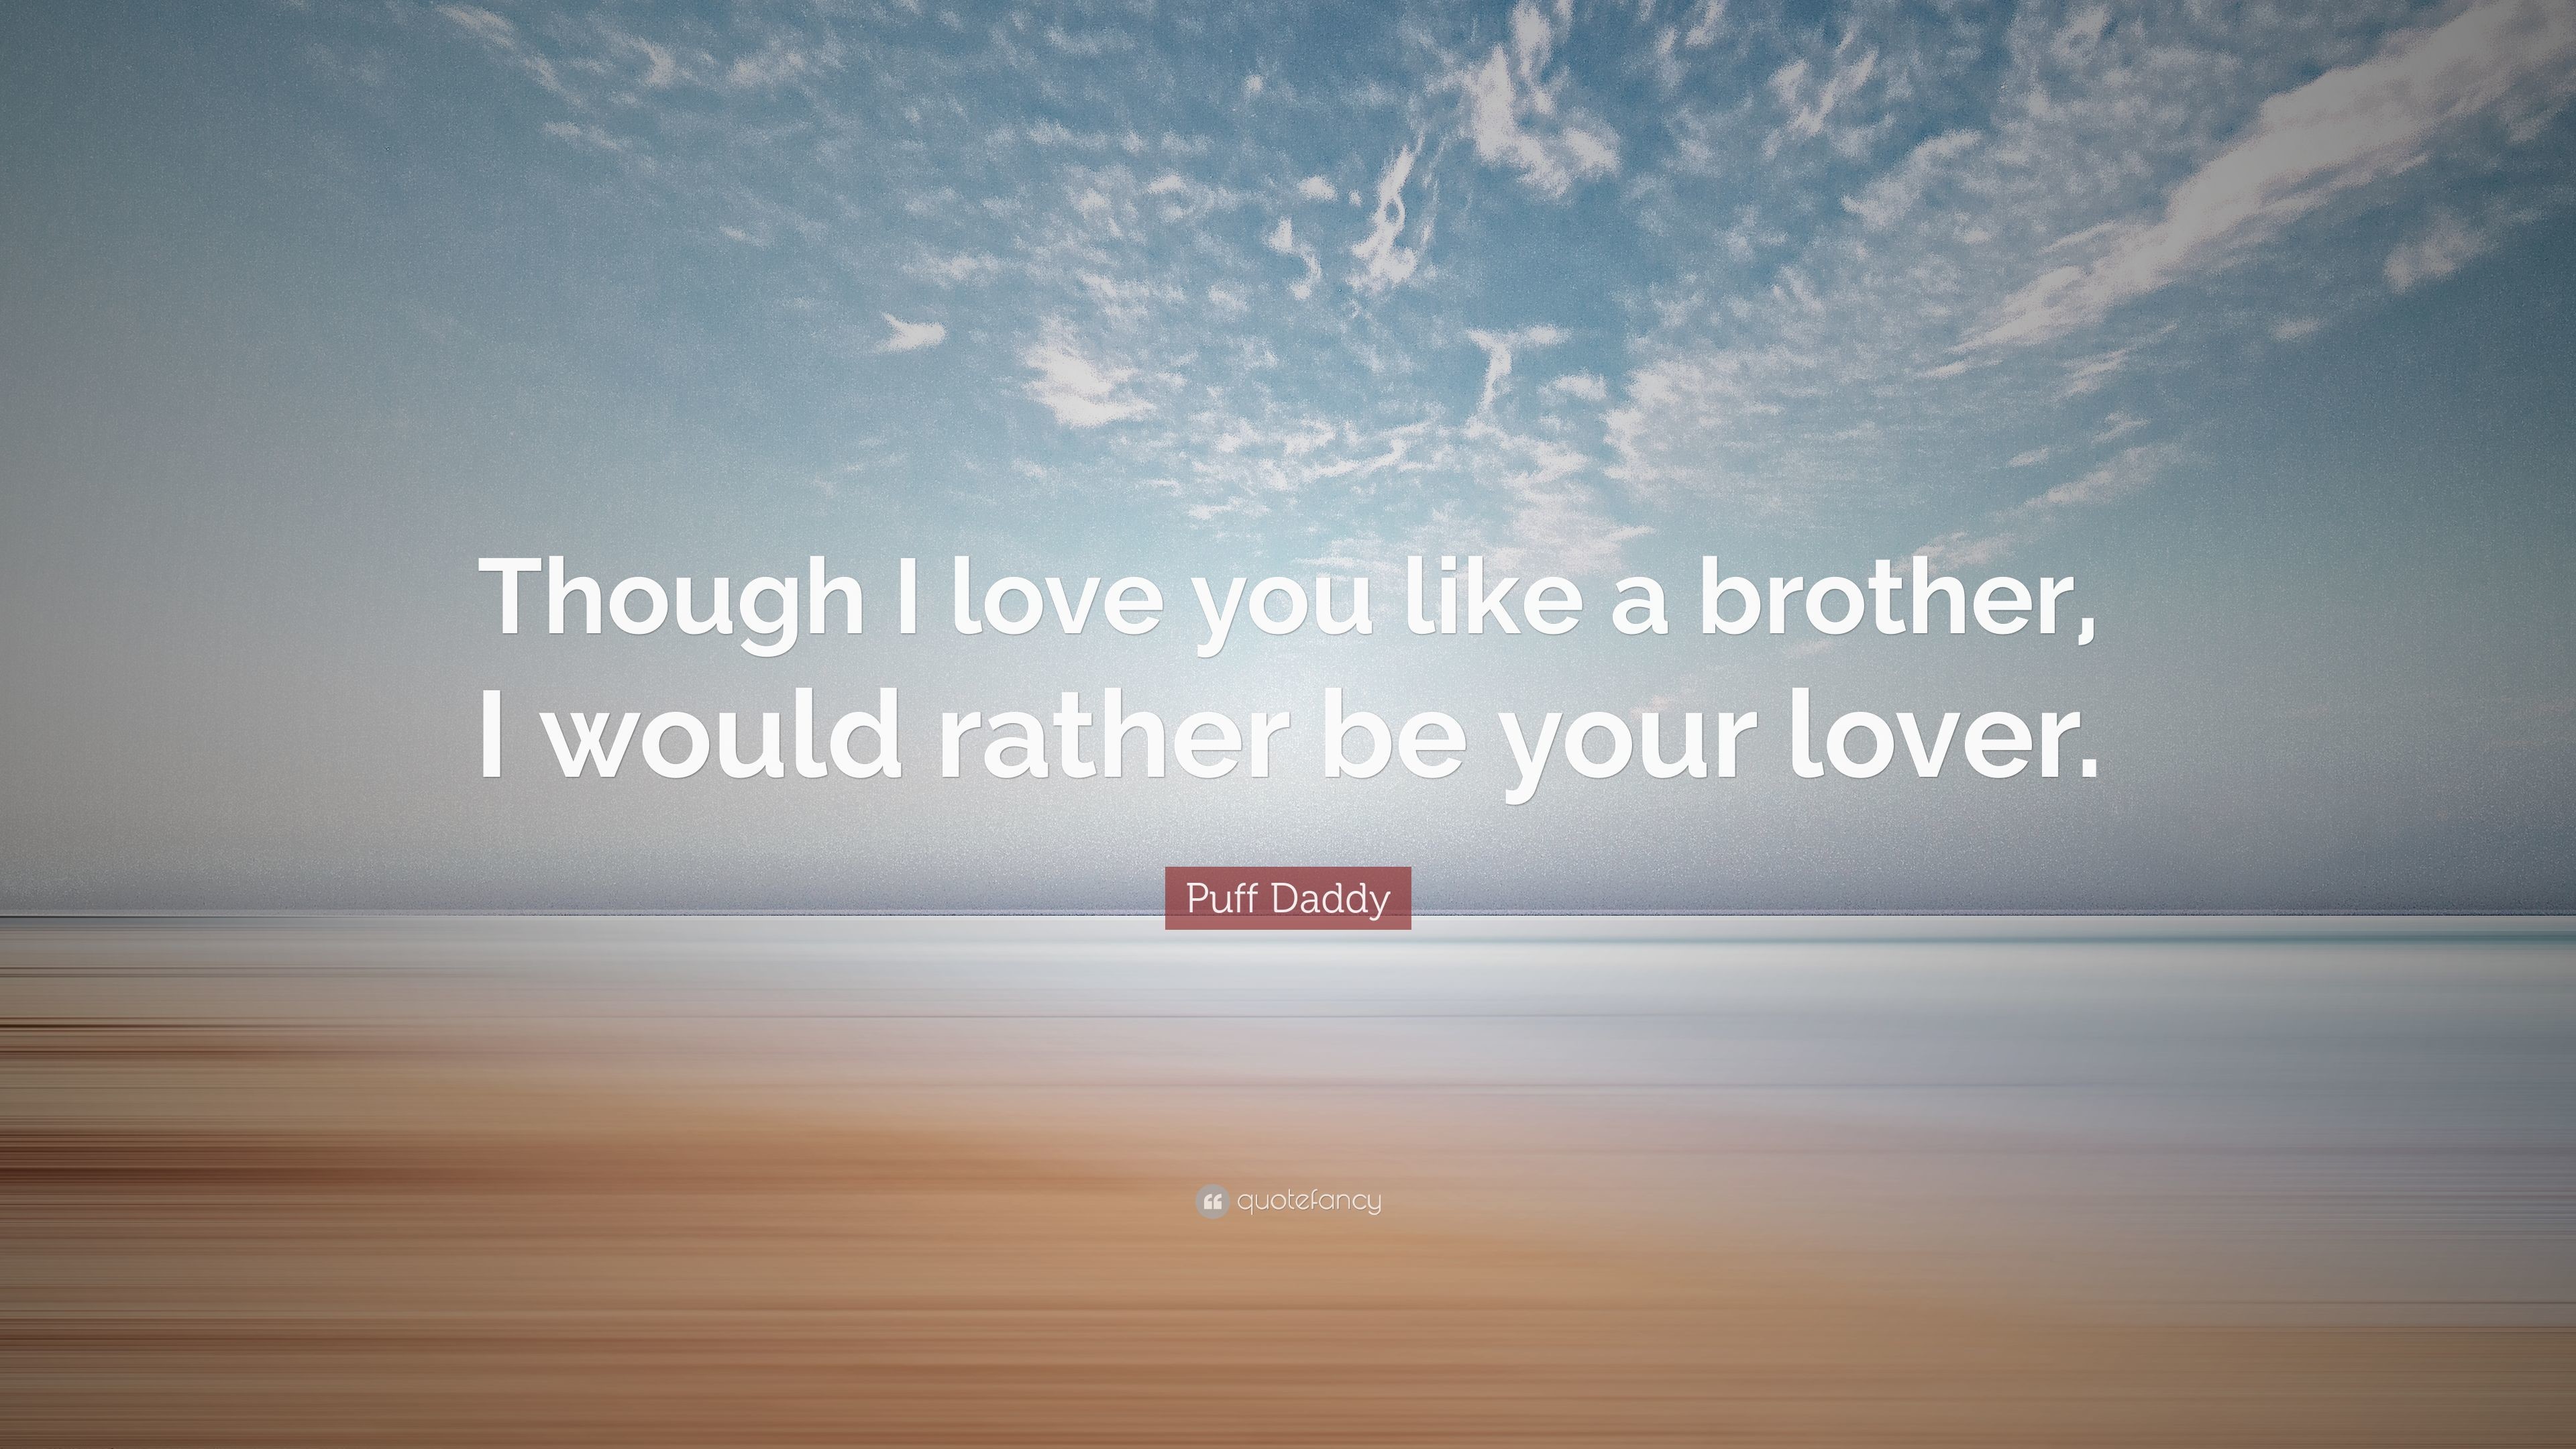 3840x2160 Puff Daddy Quote: “Though I love you like a brother, I would rather